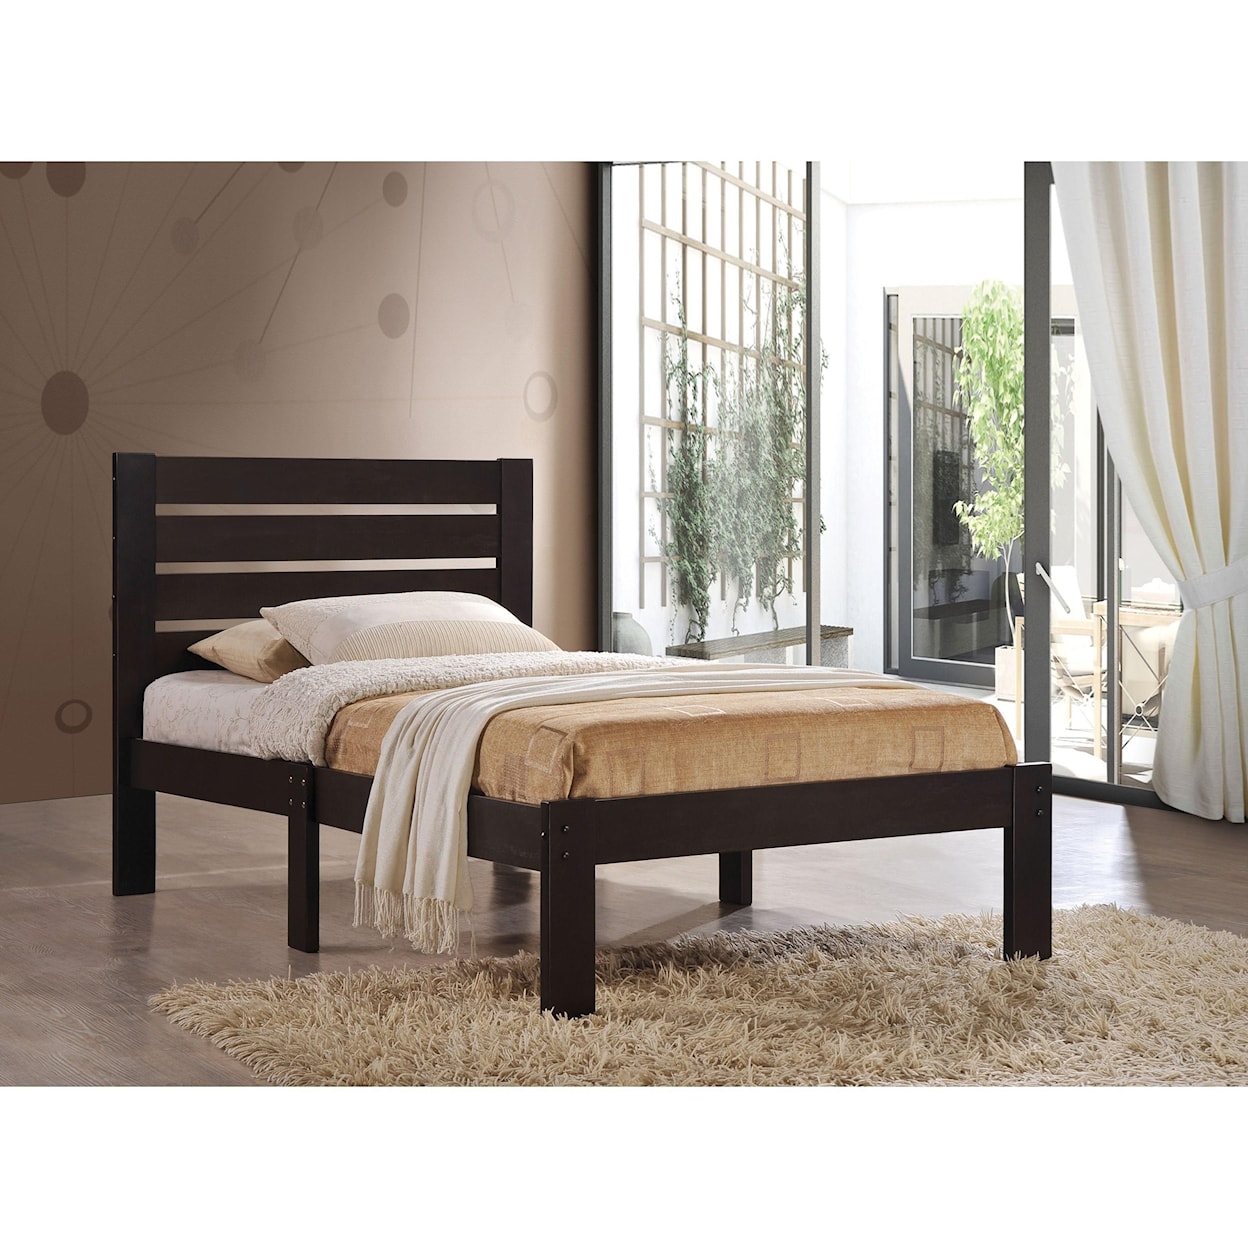 Acme Furniture Kenney Full Bed